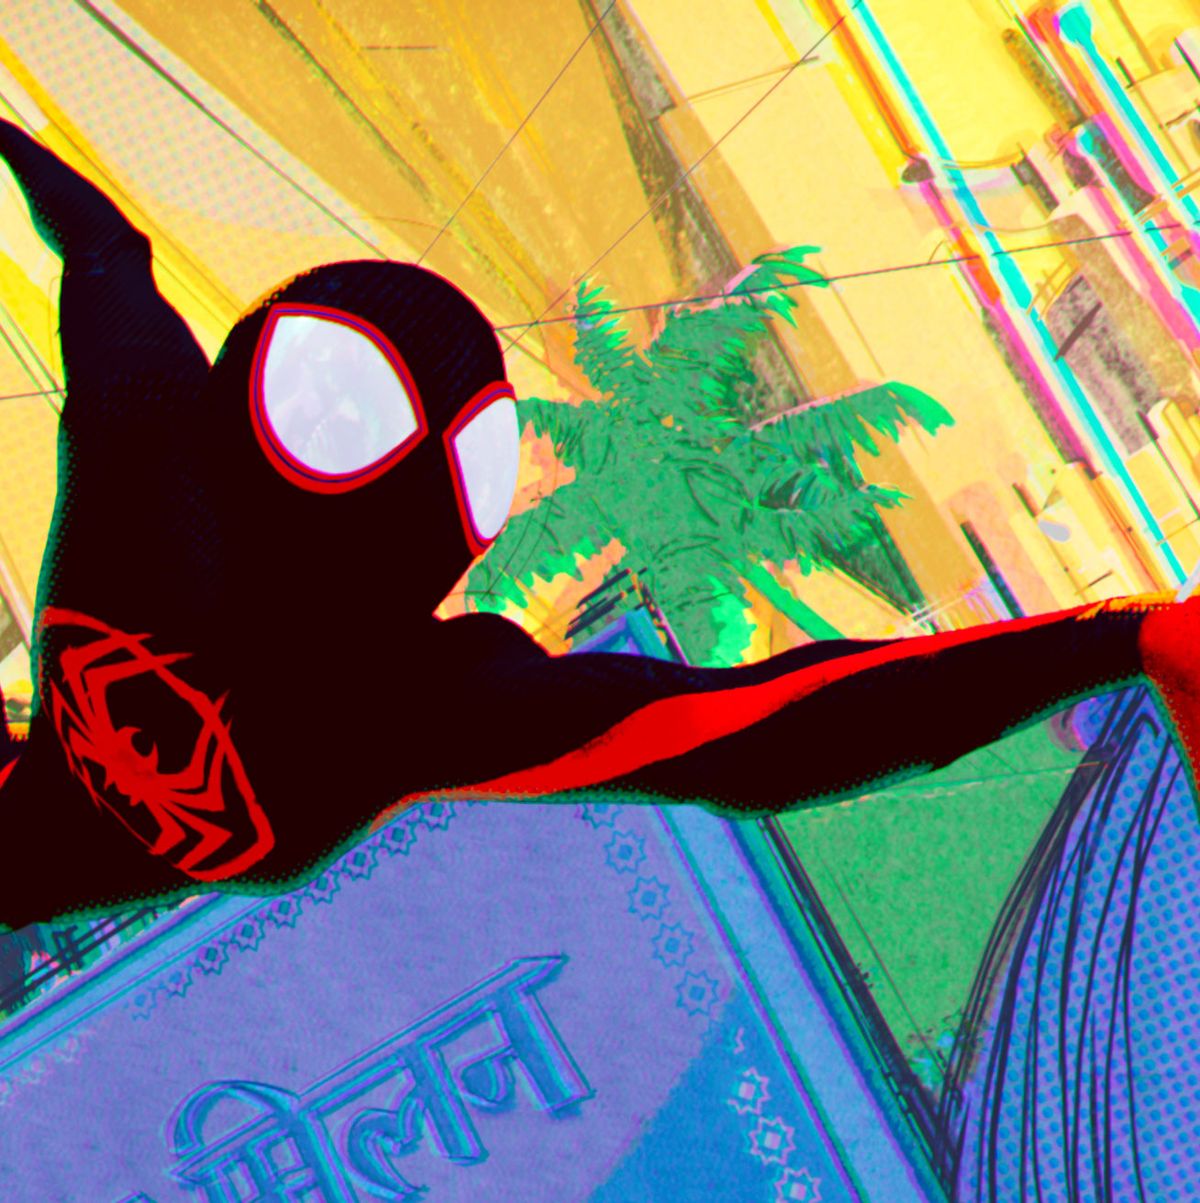 Spider-Man Across the Spider-Verse release date, trailer and more